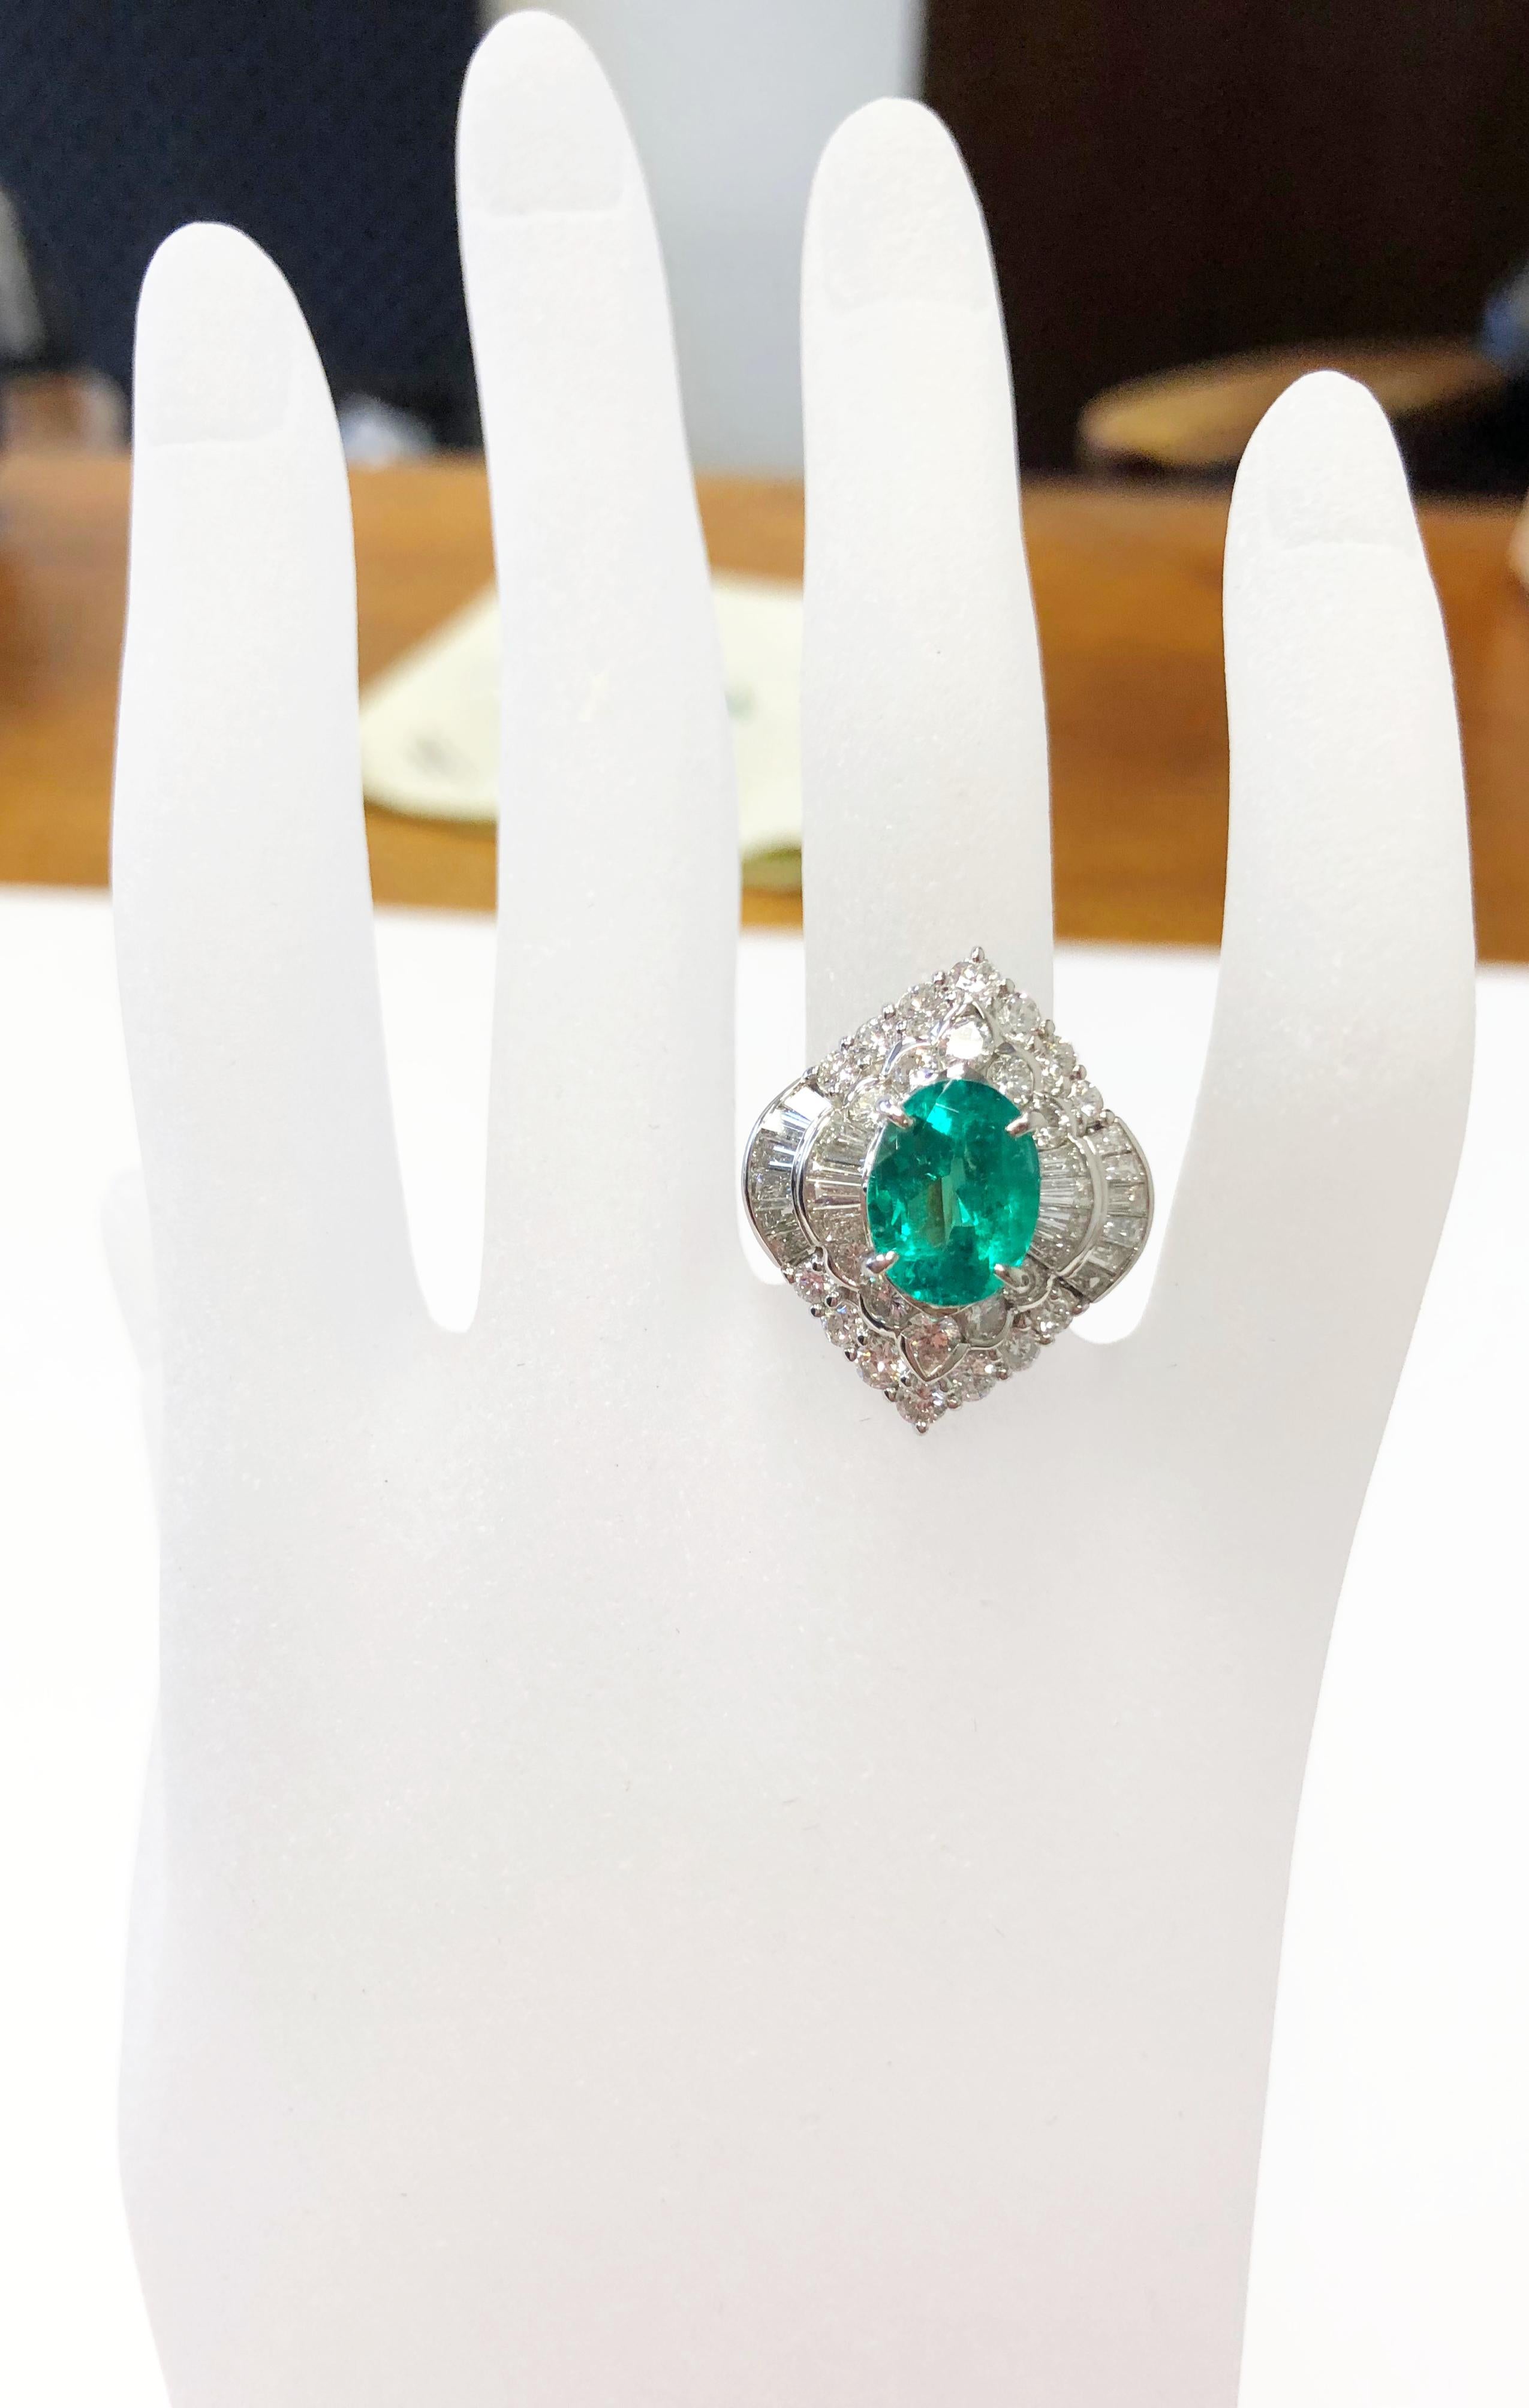 Alluring oval emerald weighing 3 carats with bright white diamond rounds and baguettes weighing 2.34 carats.  Handcrafted platinum mounting in size 7.  The emerald is bright and deep green, ideal shape and color.  Perfect for someone who loves